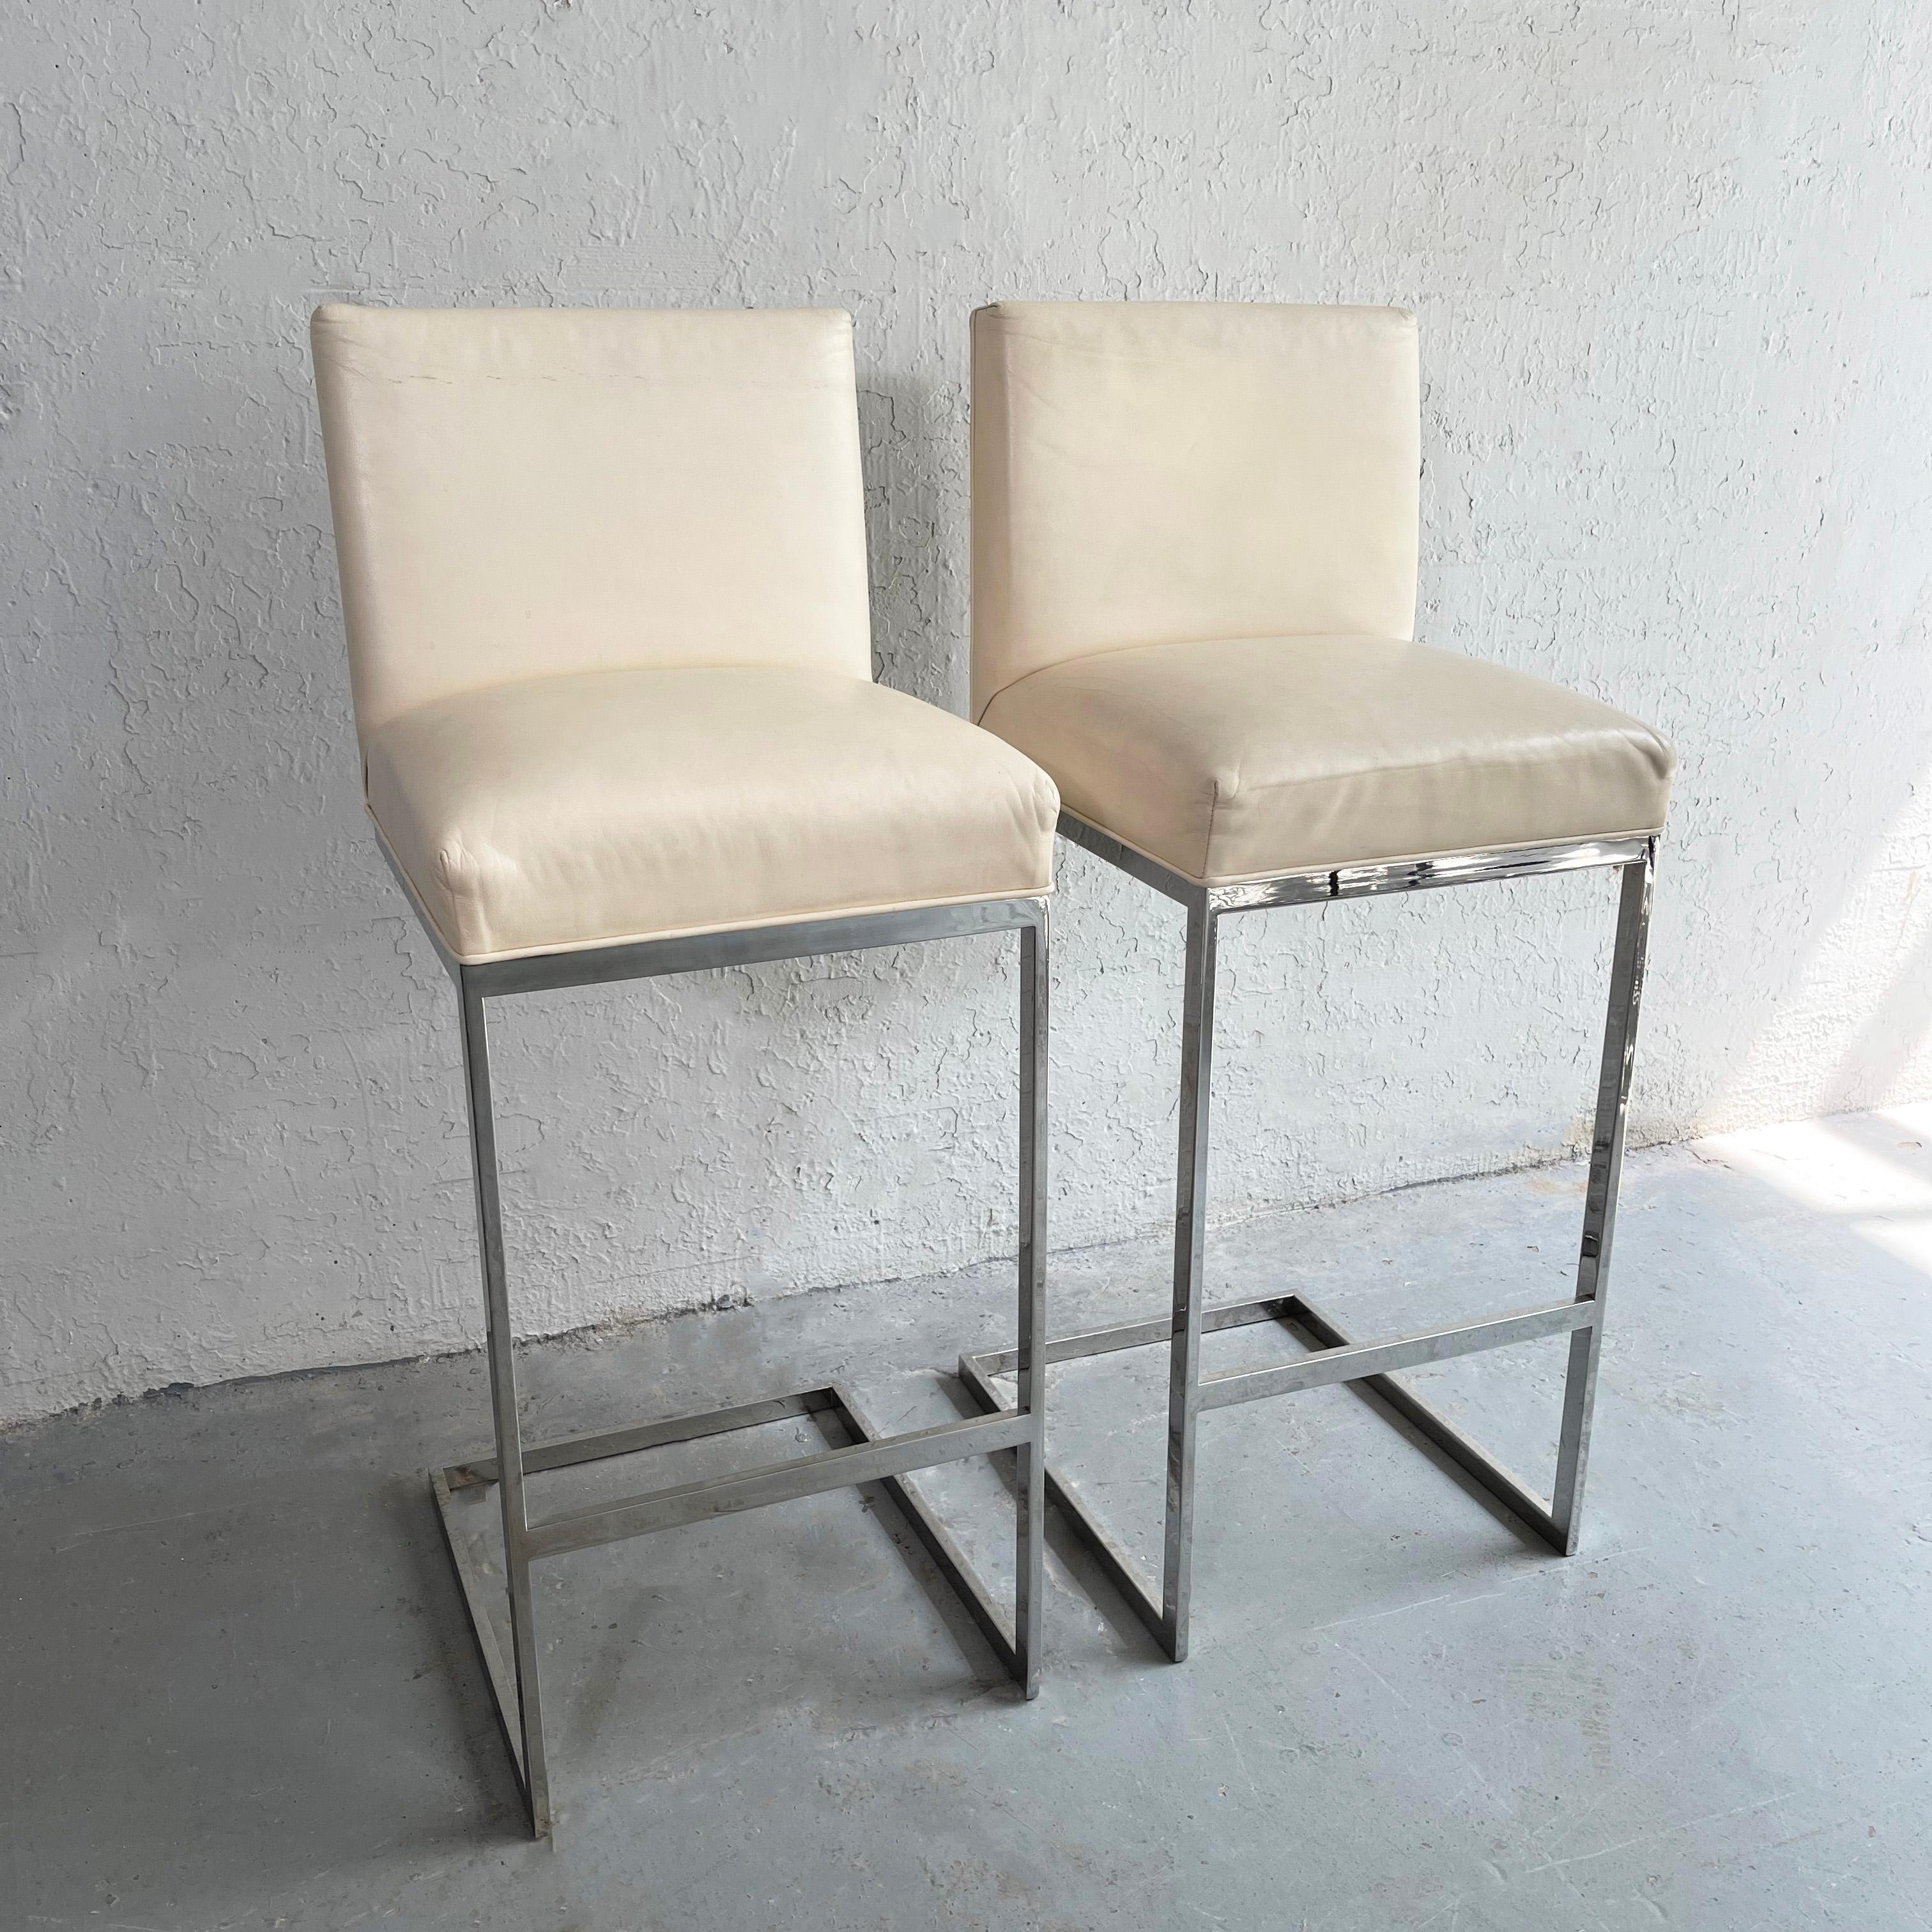 Minimal Leather Chrome Cantilever Bar Stools In Good Condition For Sale In Brooklyn, NY